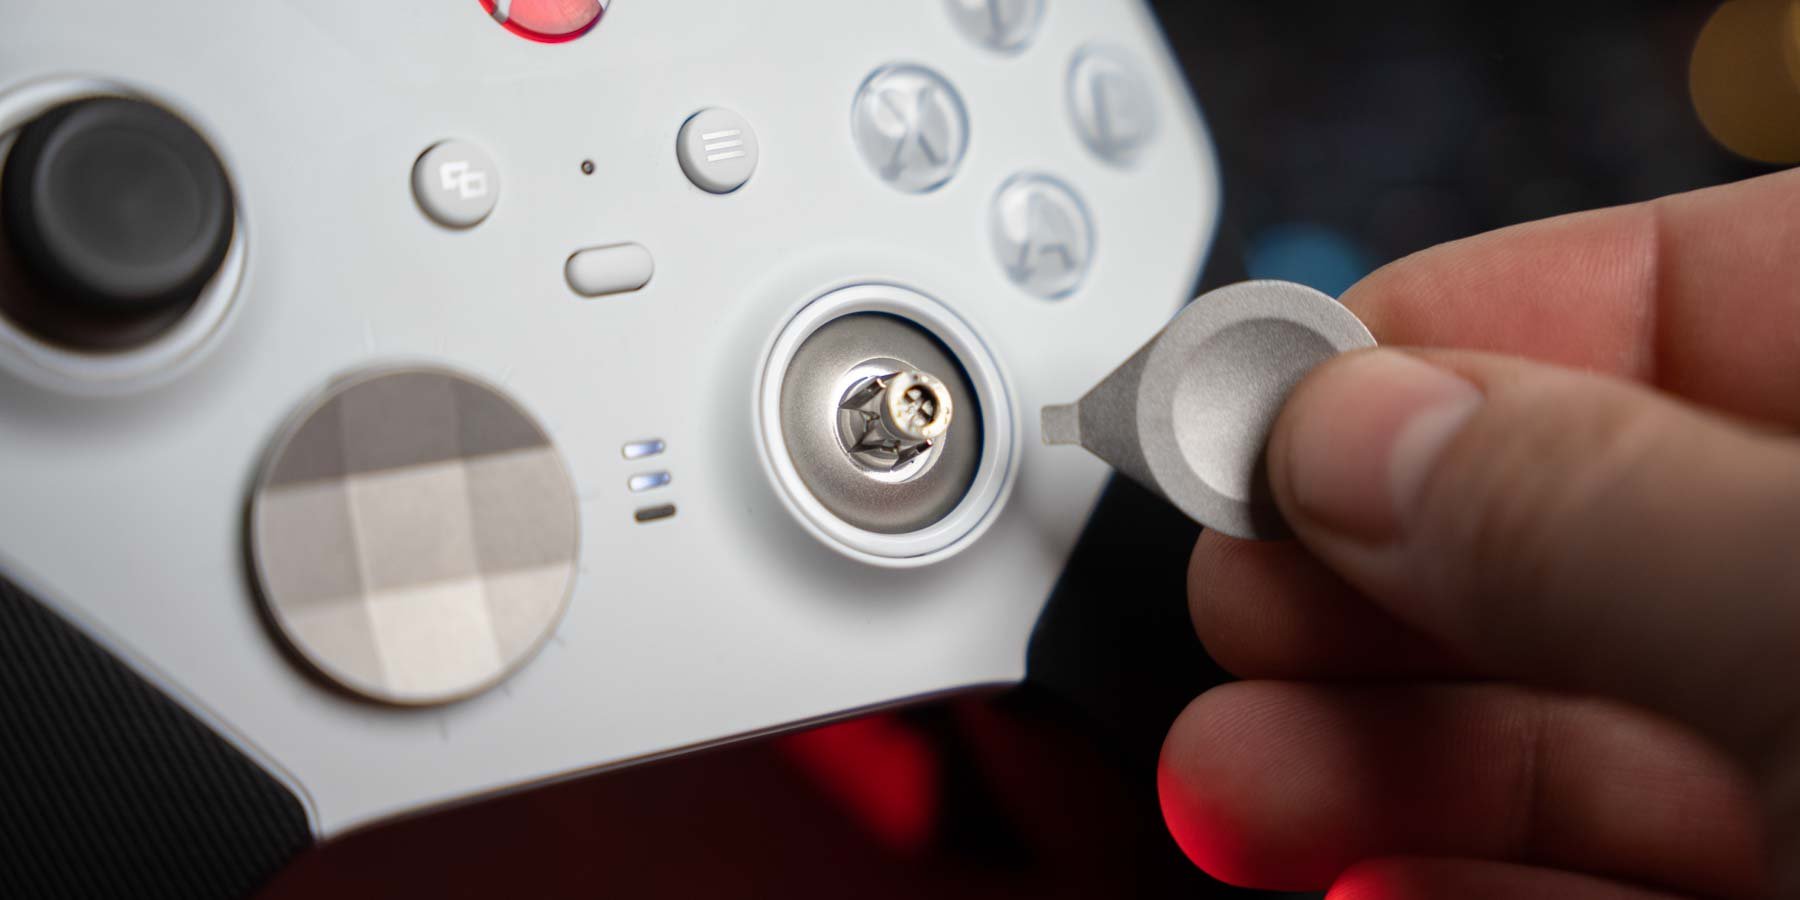  Xbox, you broke my heart: Elite Series 2 Core controller review 